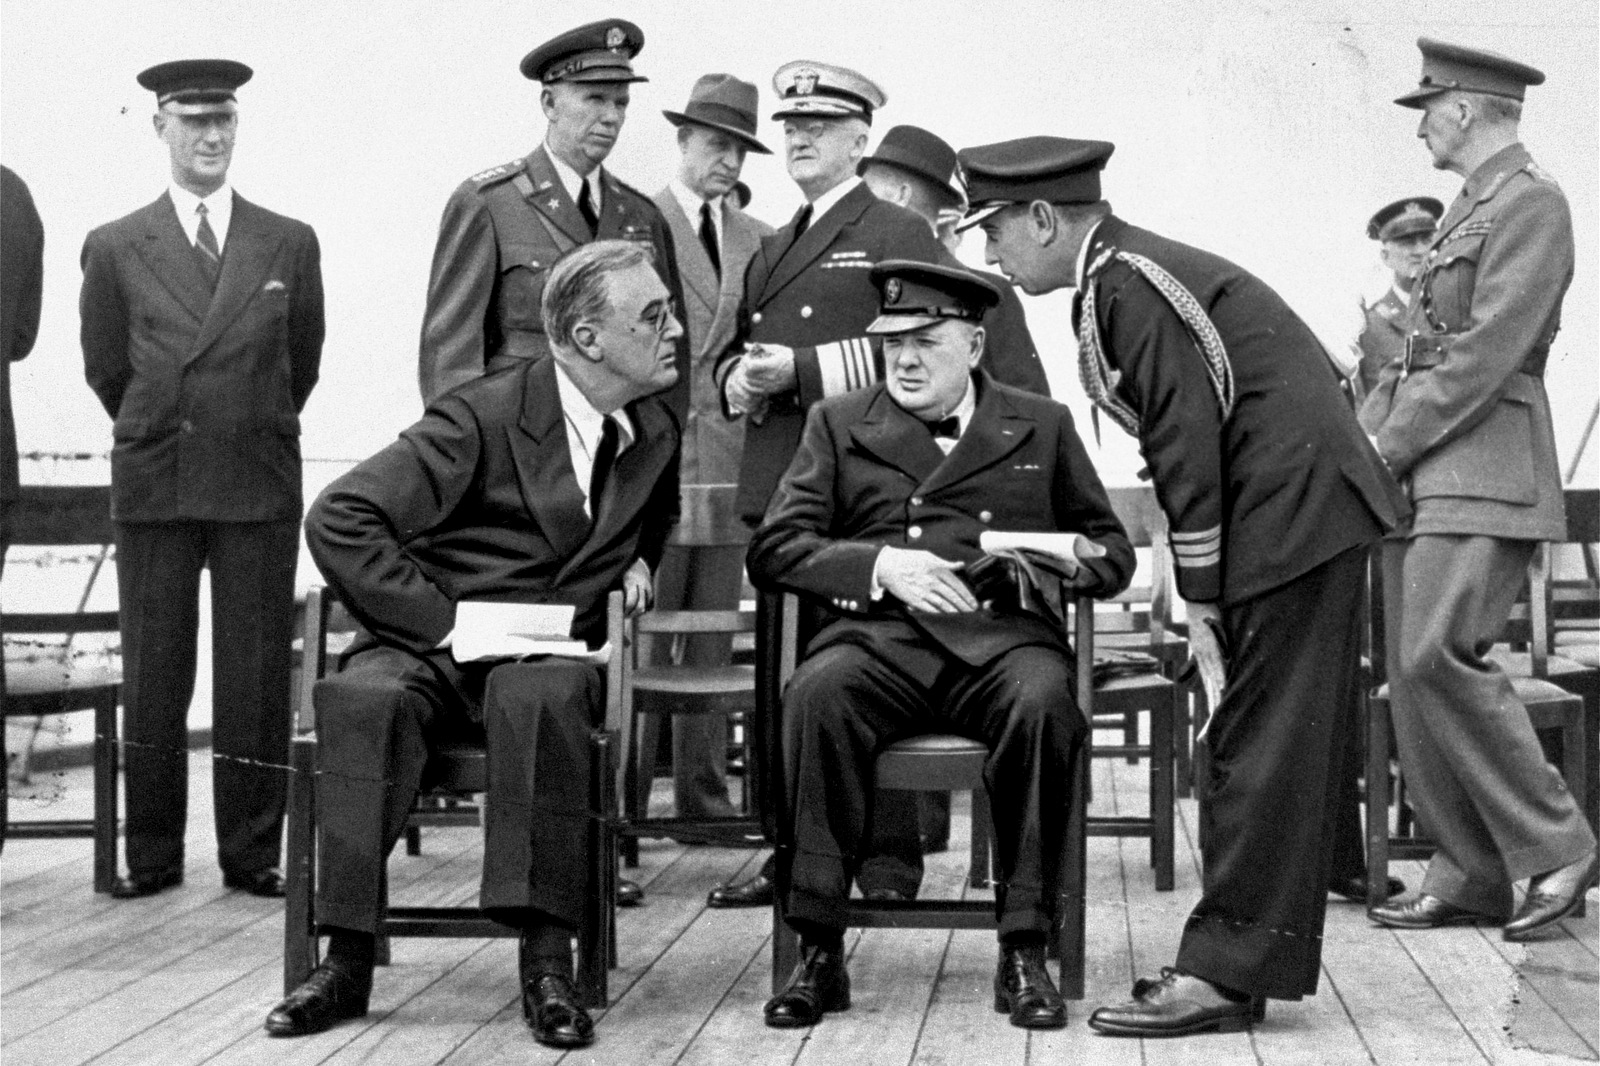 President Franklin D. Roosevelt and Prime Minister Winston Churchill aboard the HMS Prince of Wales, August 14, 1941, working on the principles of fair dealing that became The Atlantic Charter. (AP Photo)